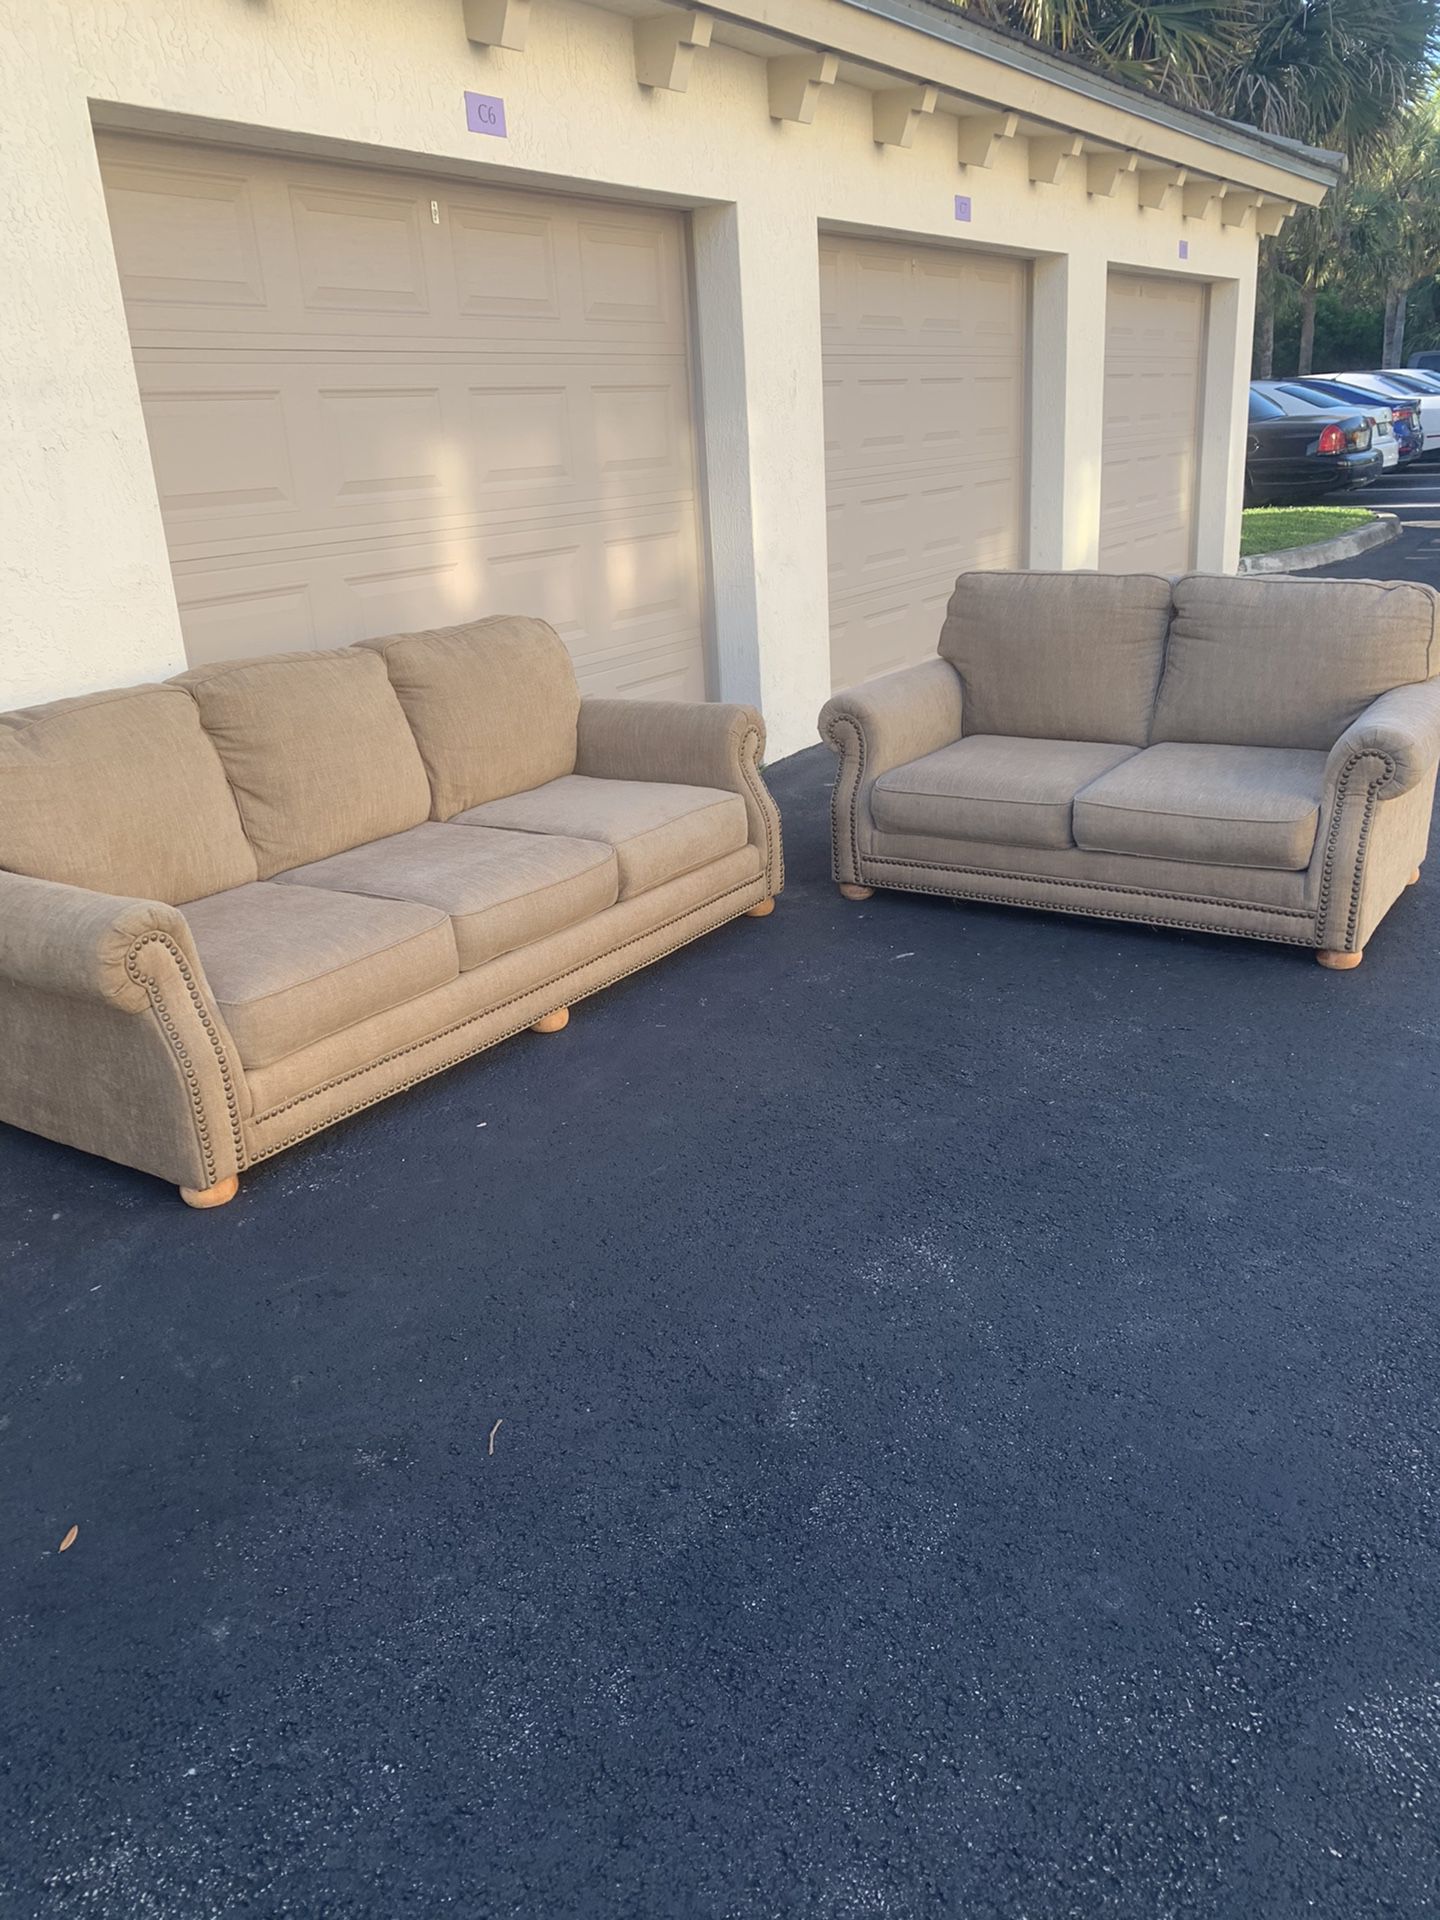 Sofa and loveseat - delivery is negotiable